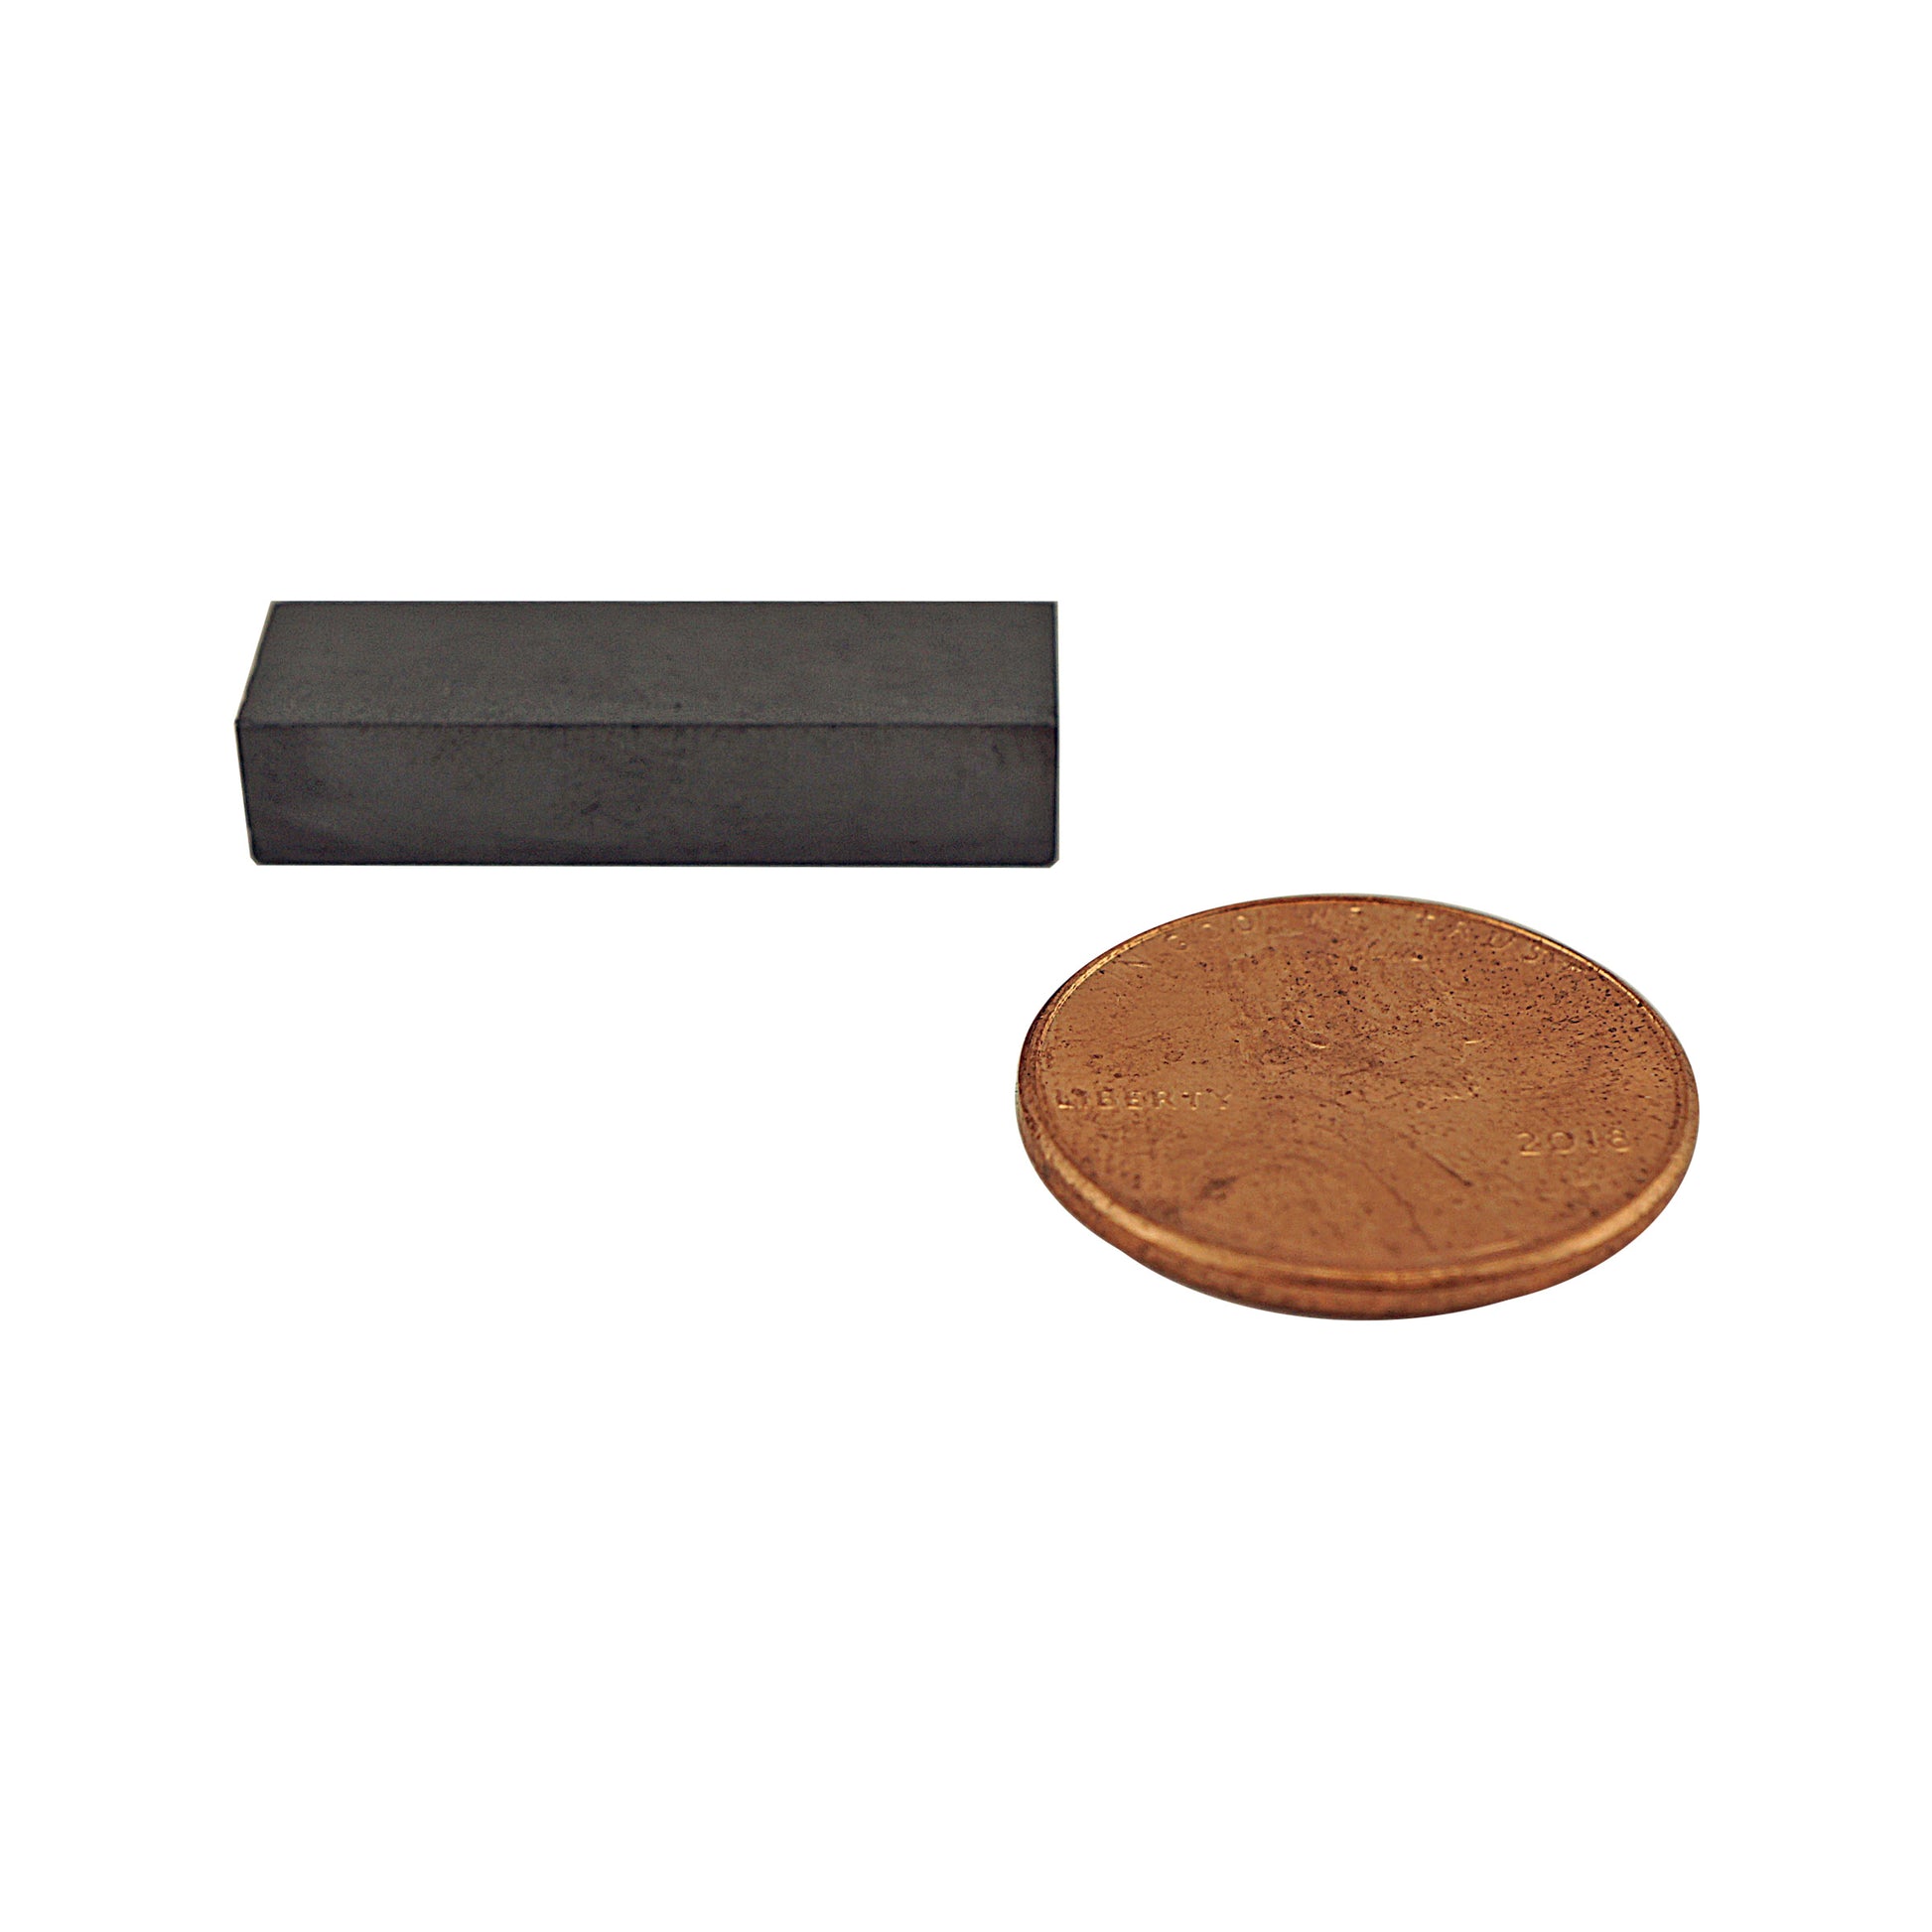 Load image into Gallery viewer, CB005036-S Ceramic Block Magnet - Compared to Penny for Size Reference